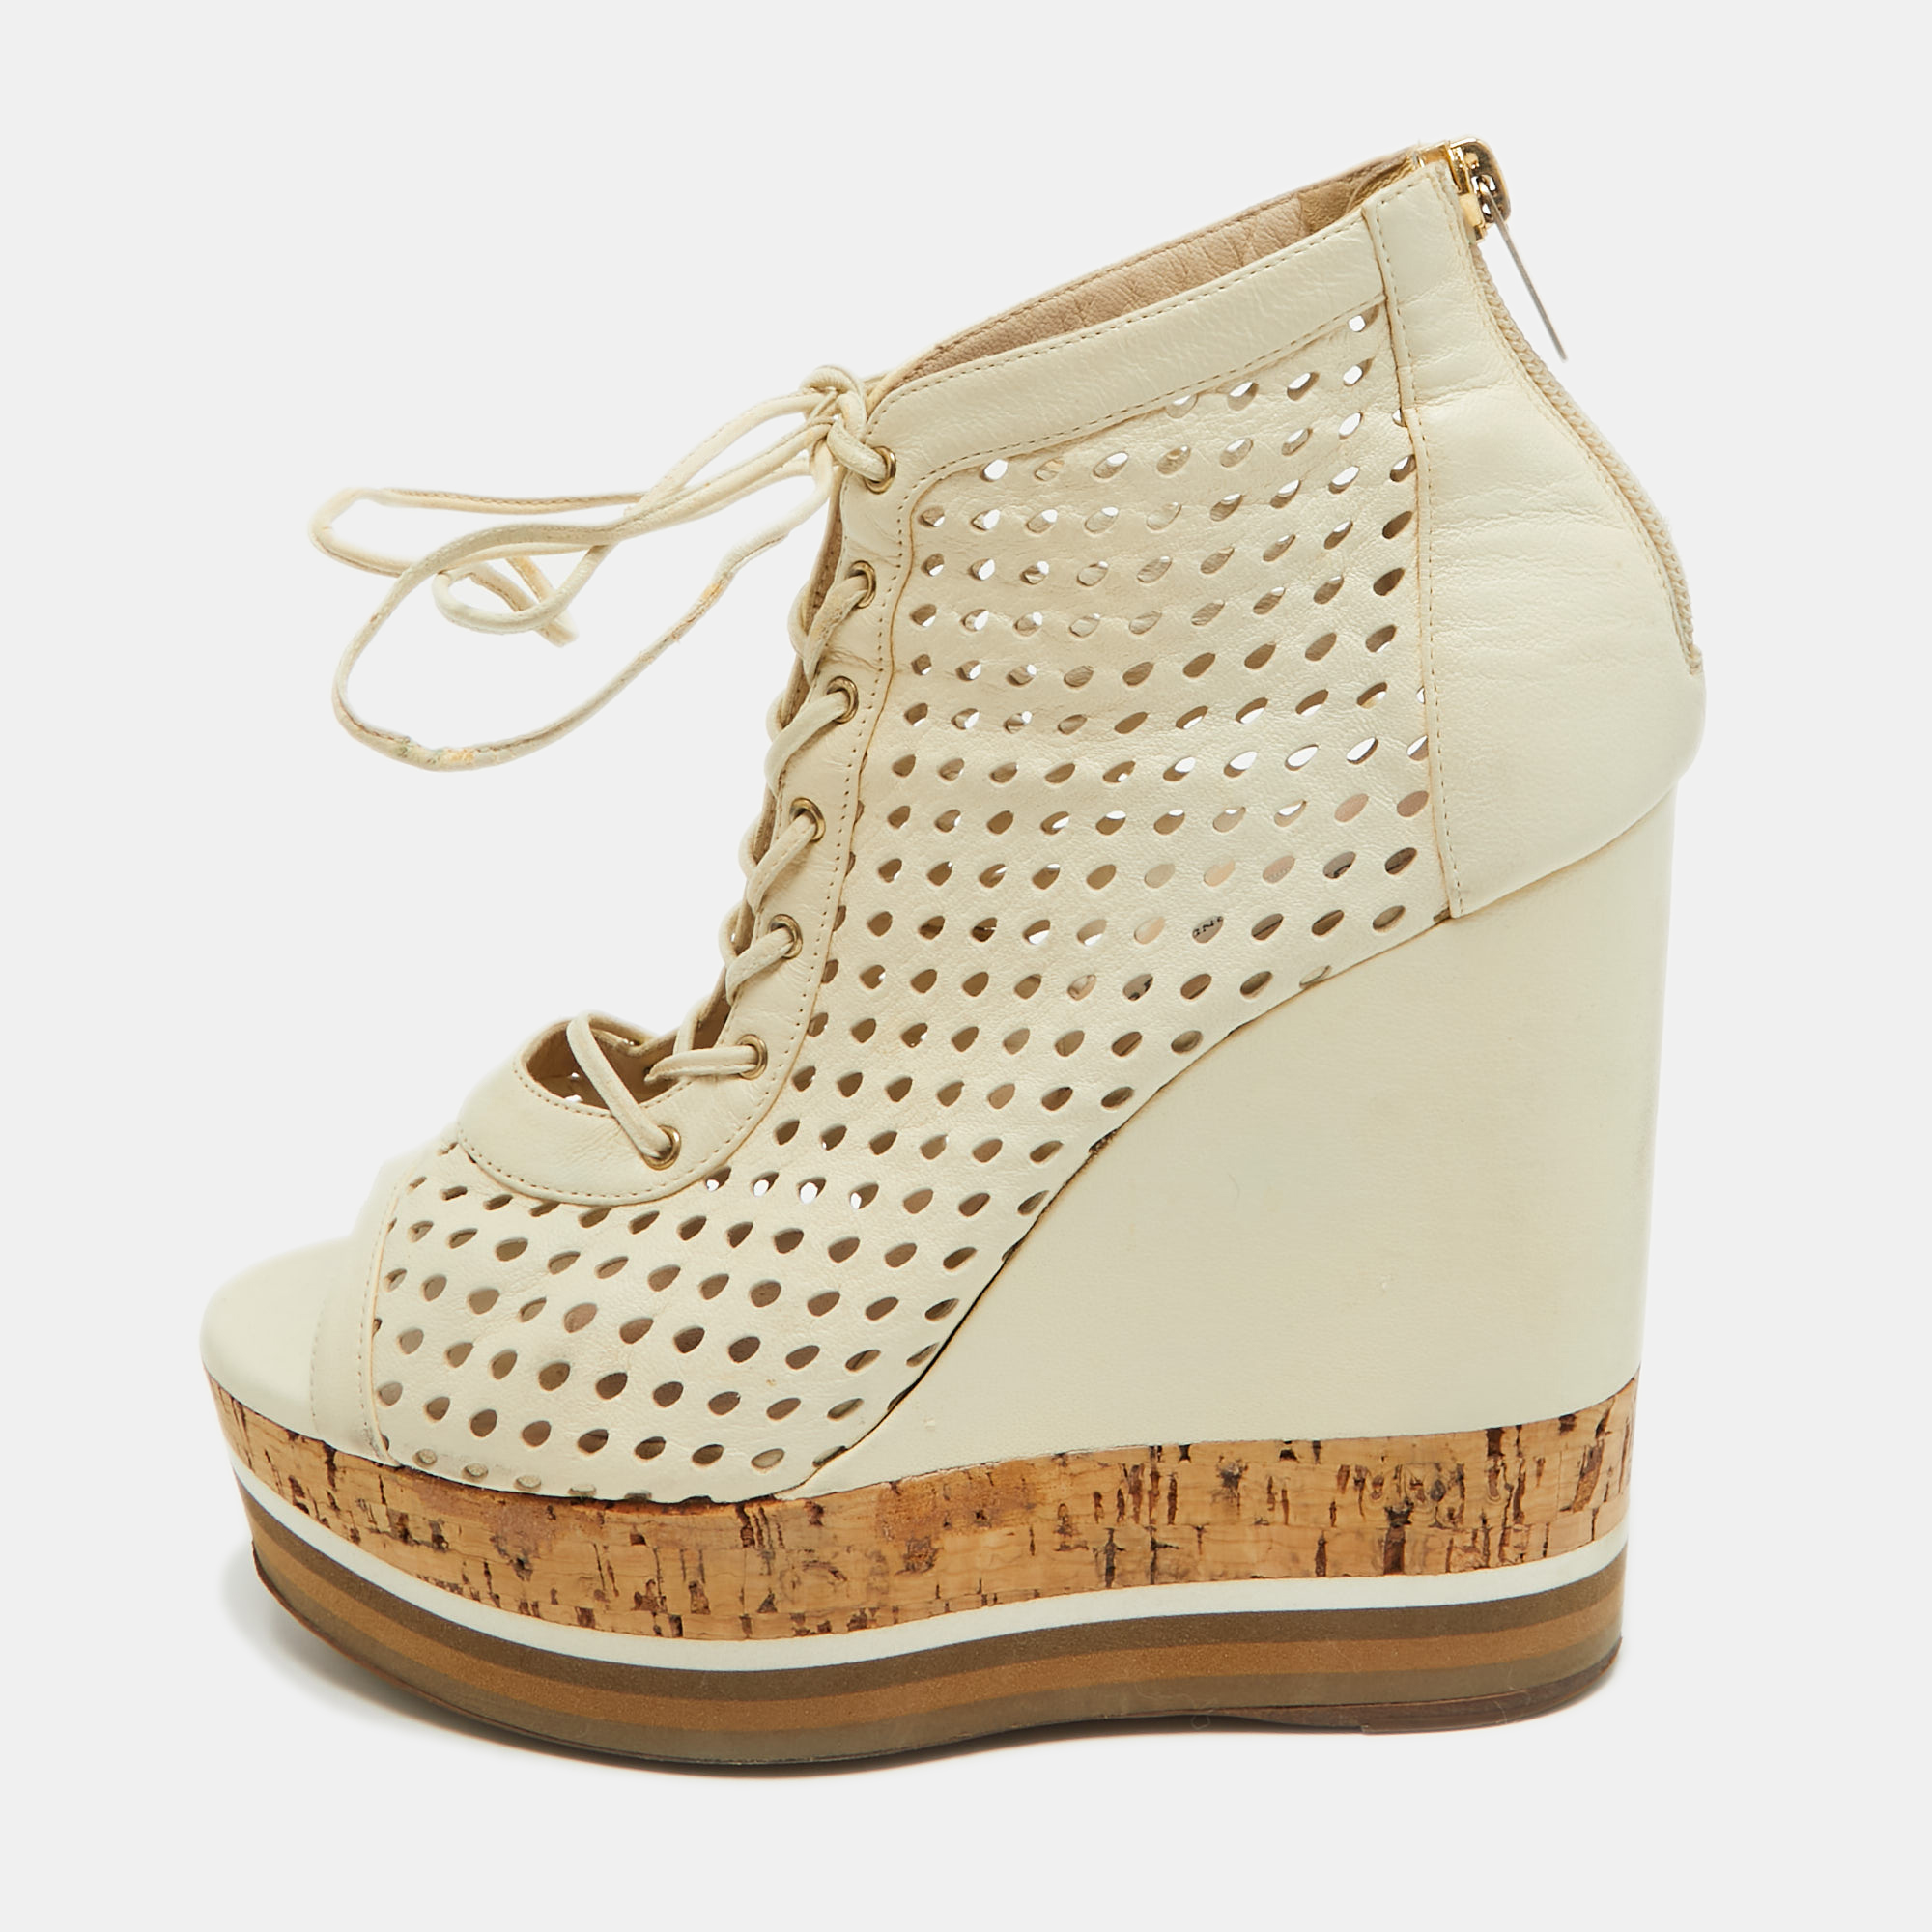 Pre-owned Jimmy Choo Off White Perforated Leather Lace Up Cork Wedge Booties Size 37